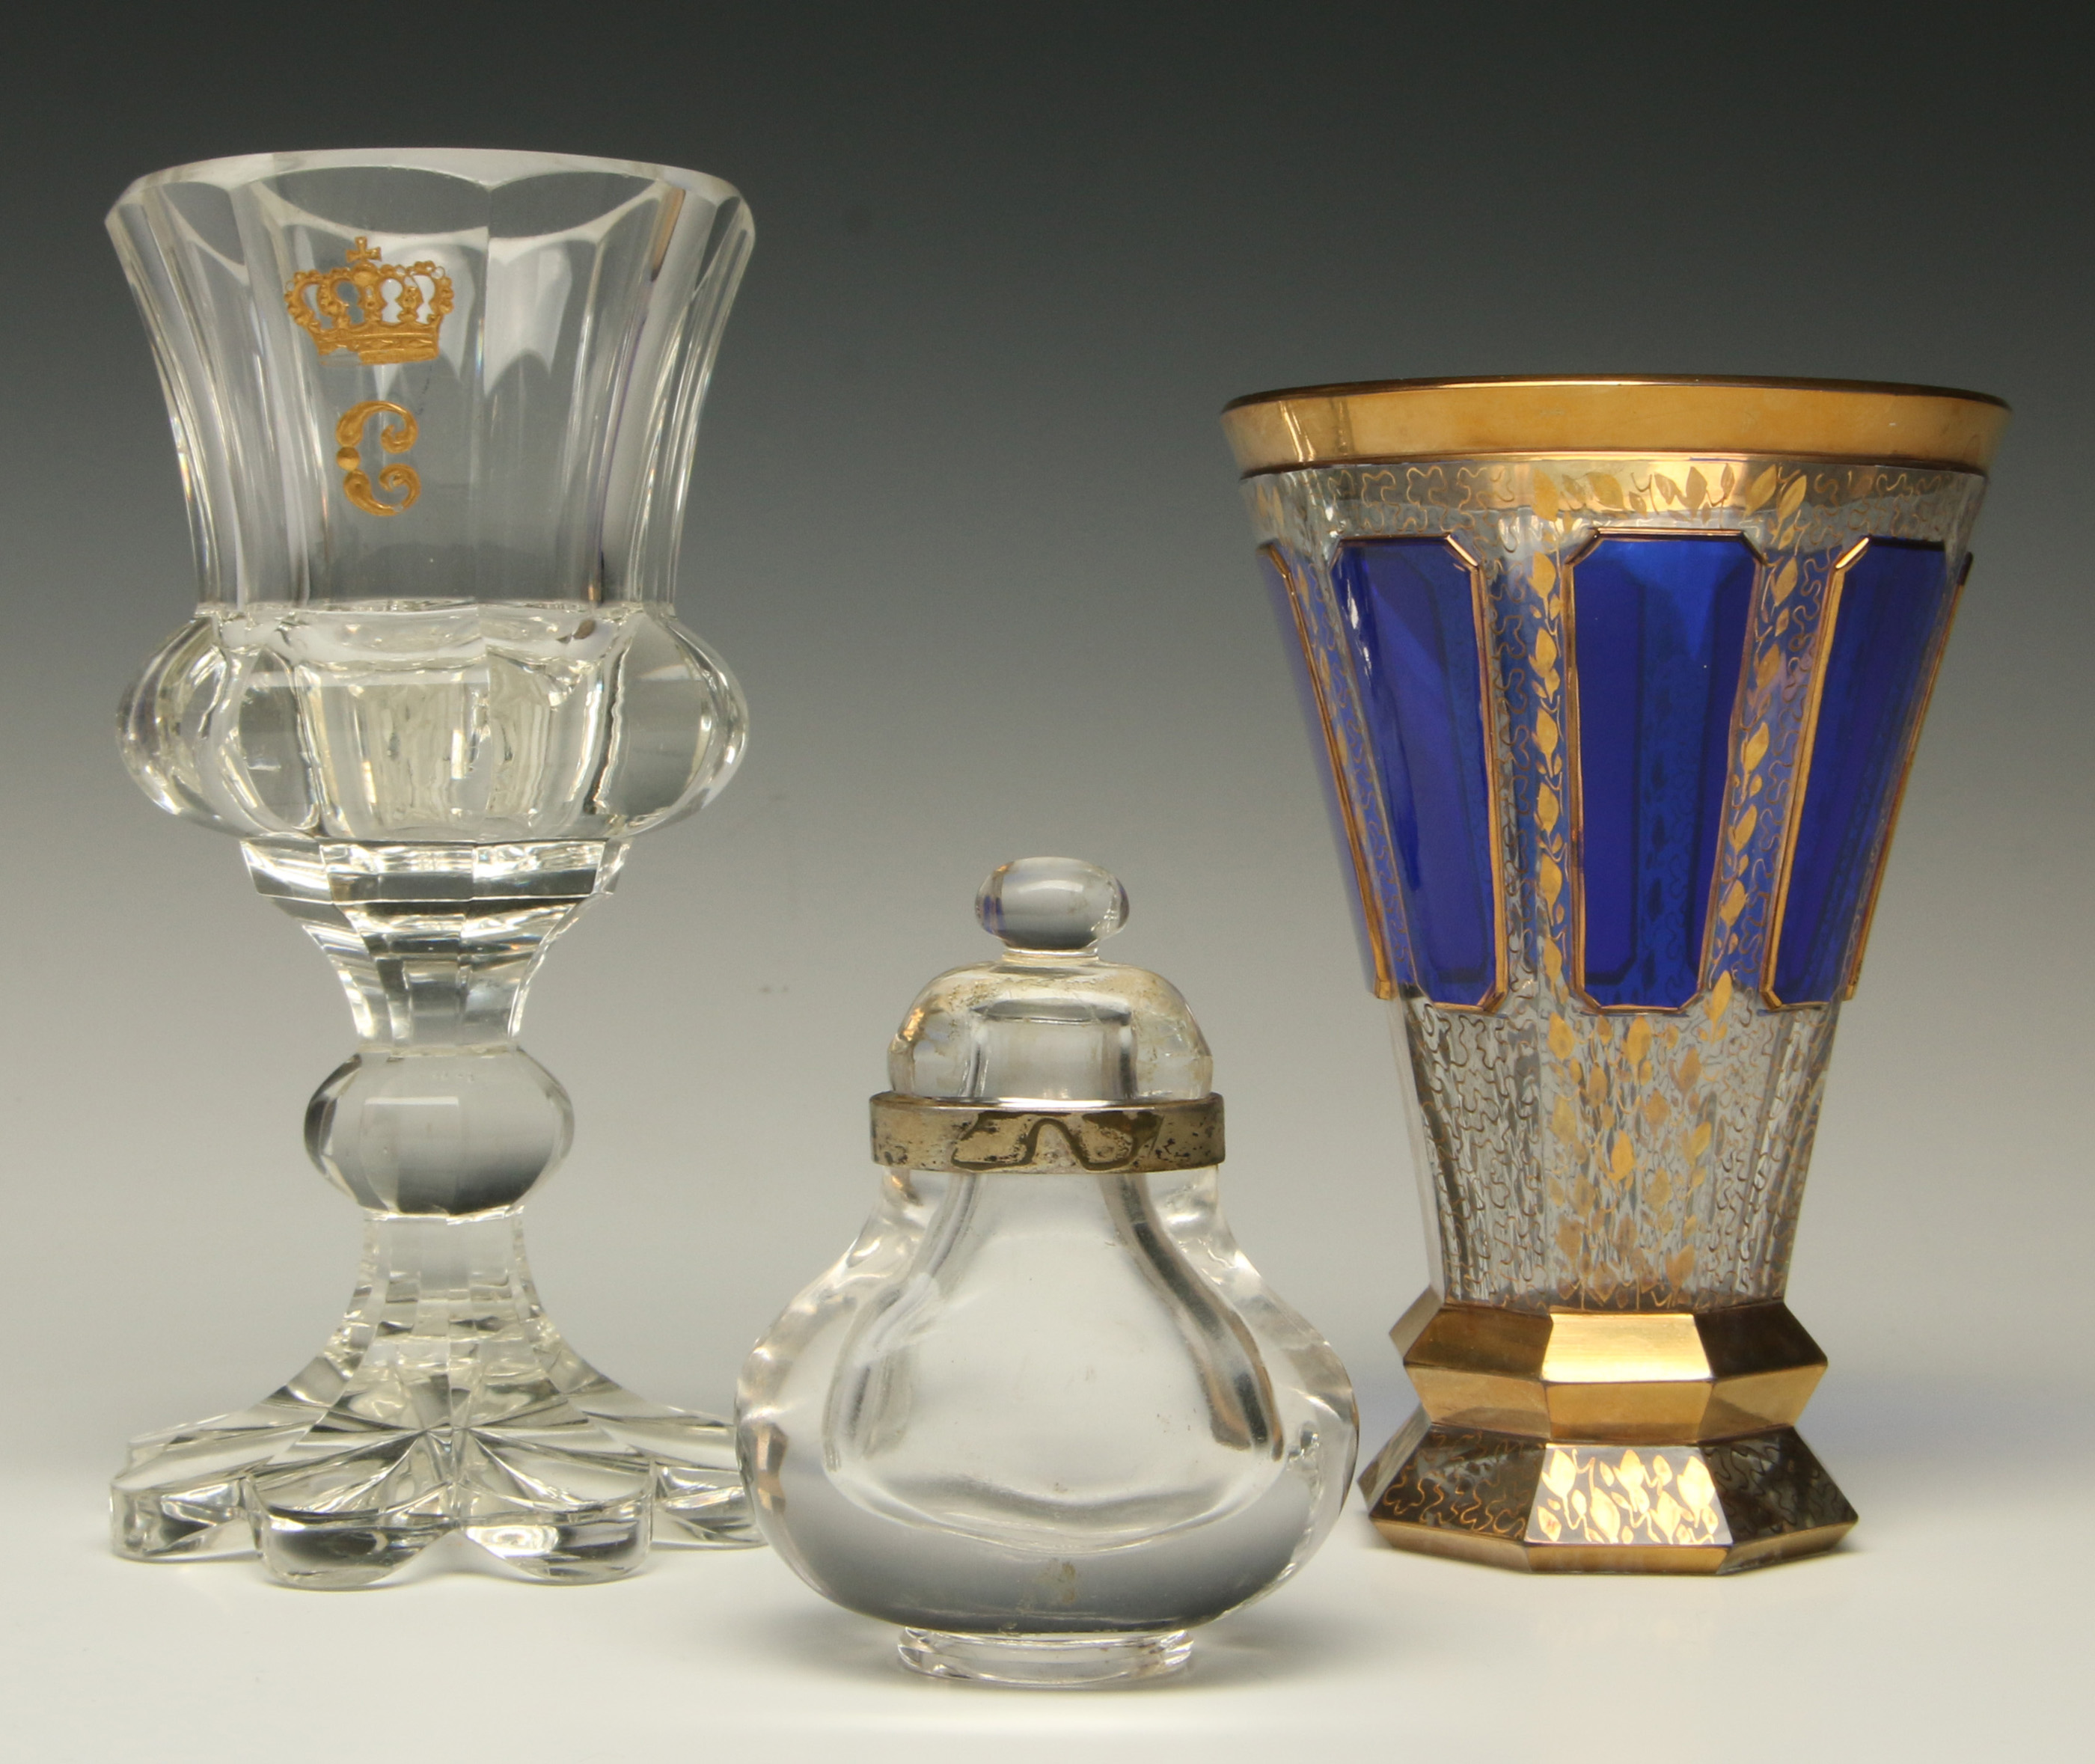 A ROCK CRYSTAL BOTTLE AND BOHEMIAN GLASS ARTICLES